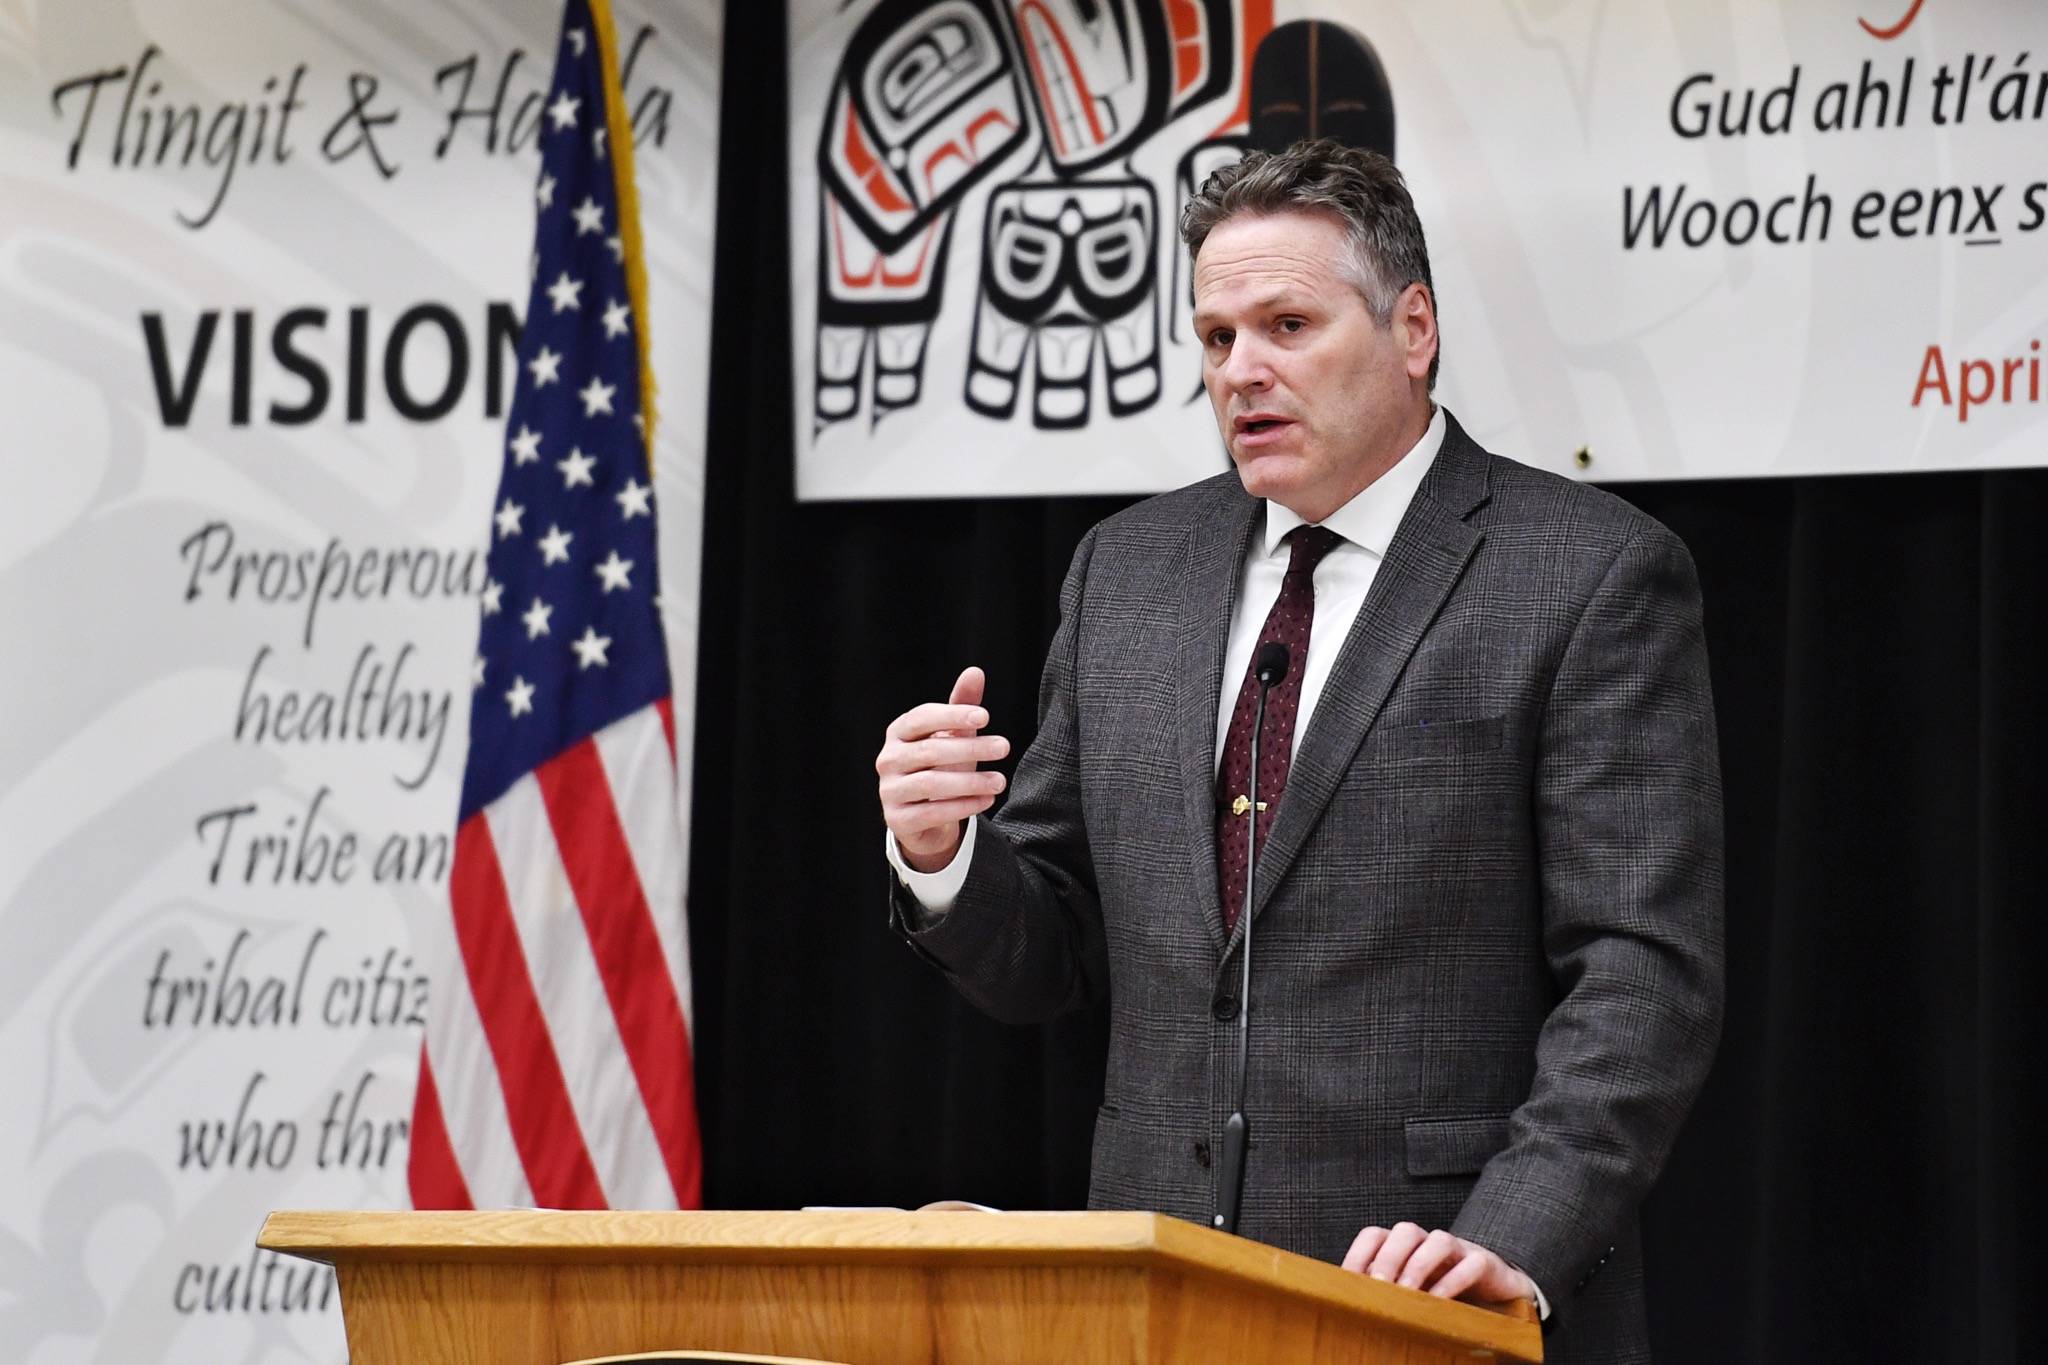 Gov. Mike Dunleavy delivers a speech to the 84th Annual Tribal Assembly of theCentral Council of the Tlingit and Haida Indian Tribes of Alaska at the Elizabeth Peratrovich Hall on Wednesday, April 10, 2019. (Michael Penn | Juneau Empire)